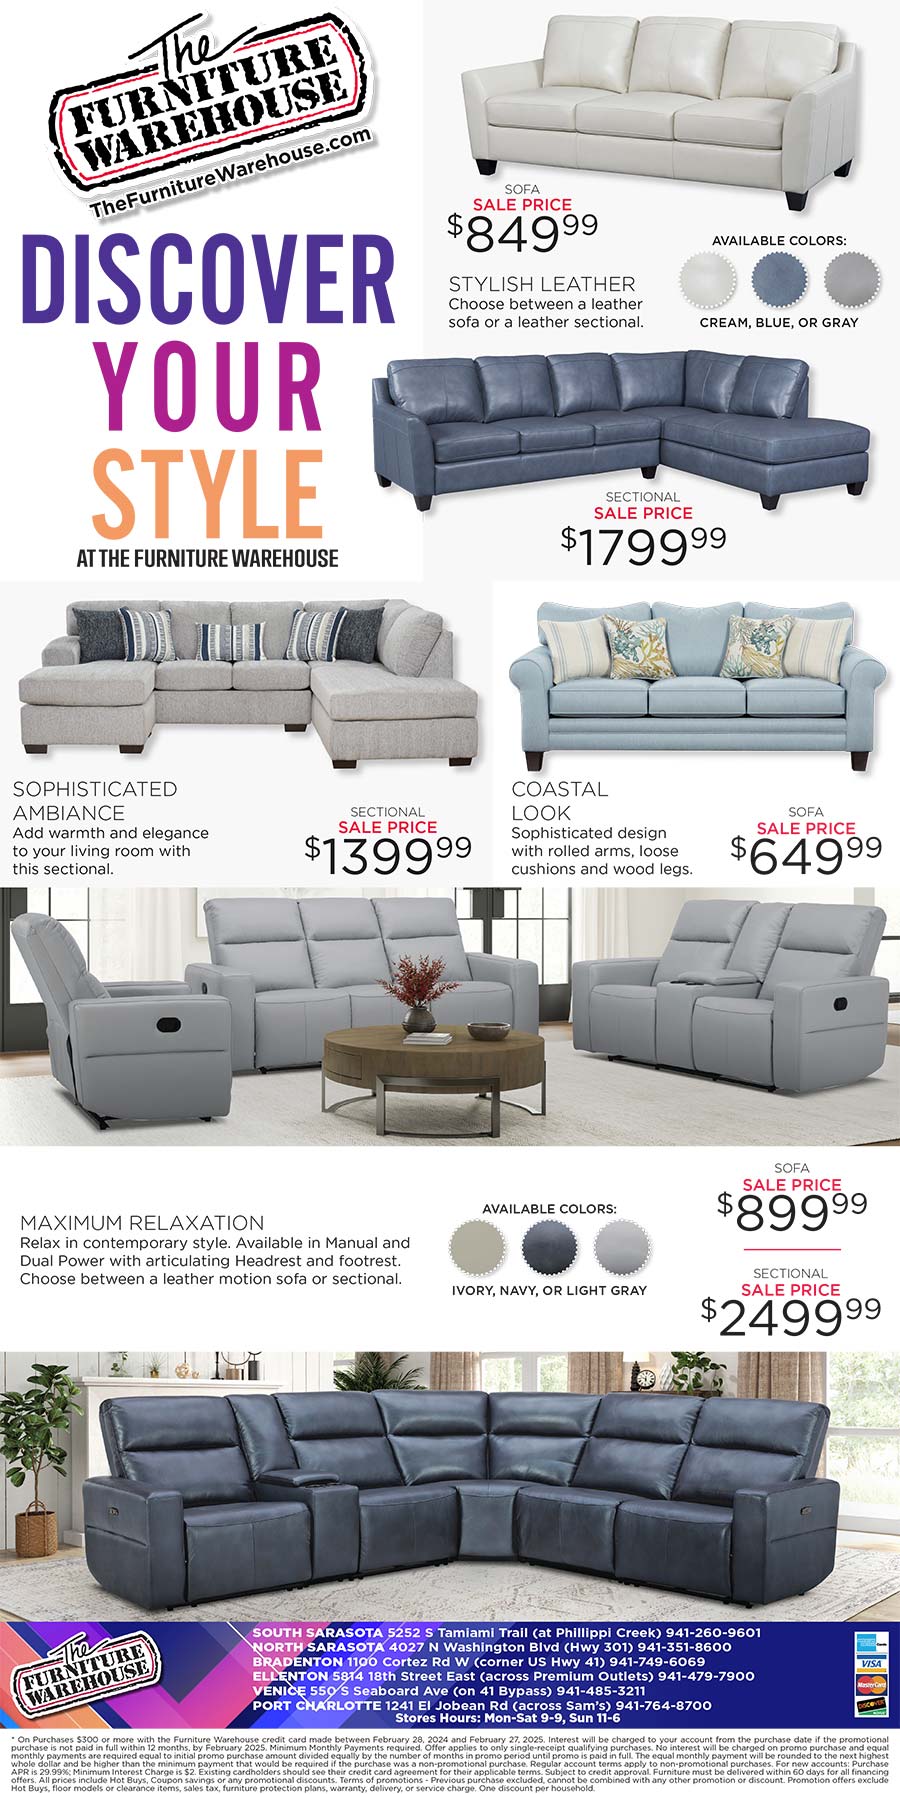 Discover Your Style at The Furniture Warehouse! Shop Our Living Room Sale!